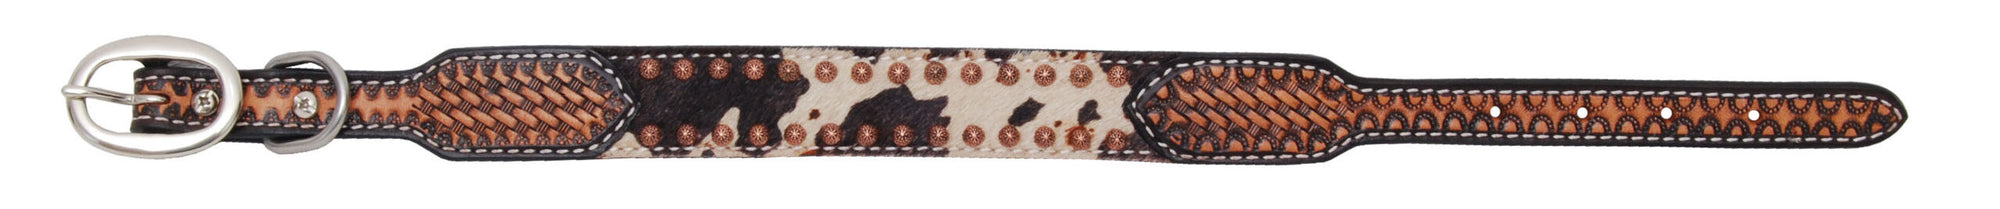 Rafter T Ranch Co. Tooled with Hair On Hide Dog Collar STYLE RTDC415-M